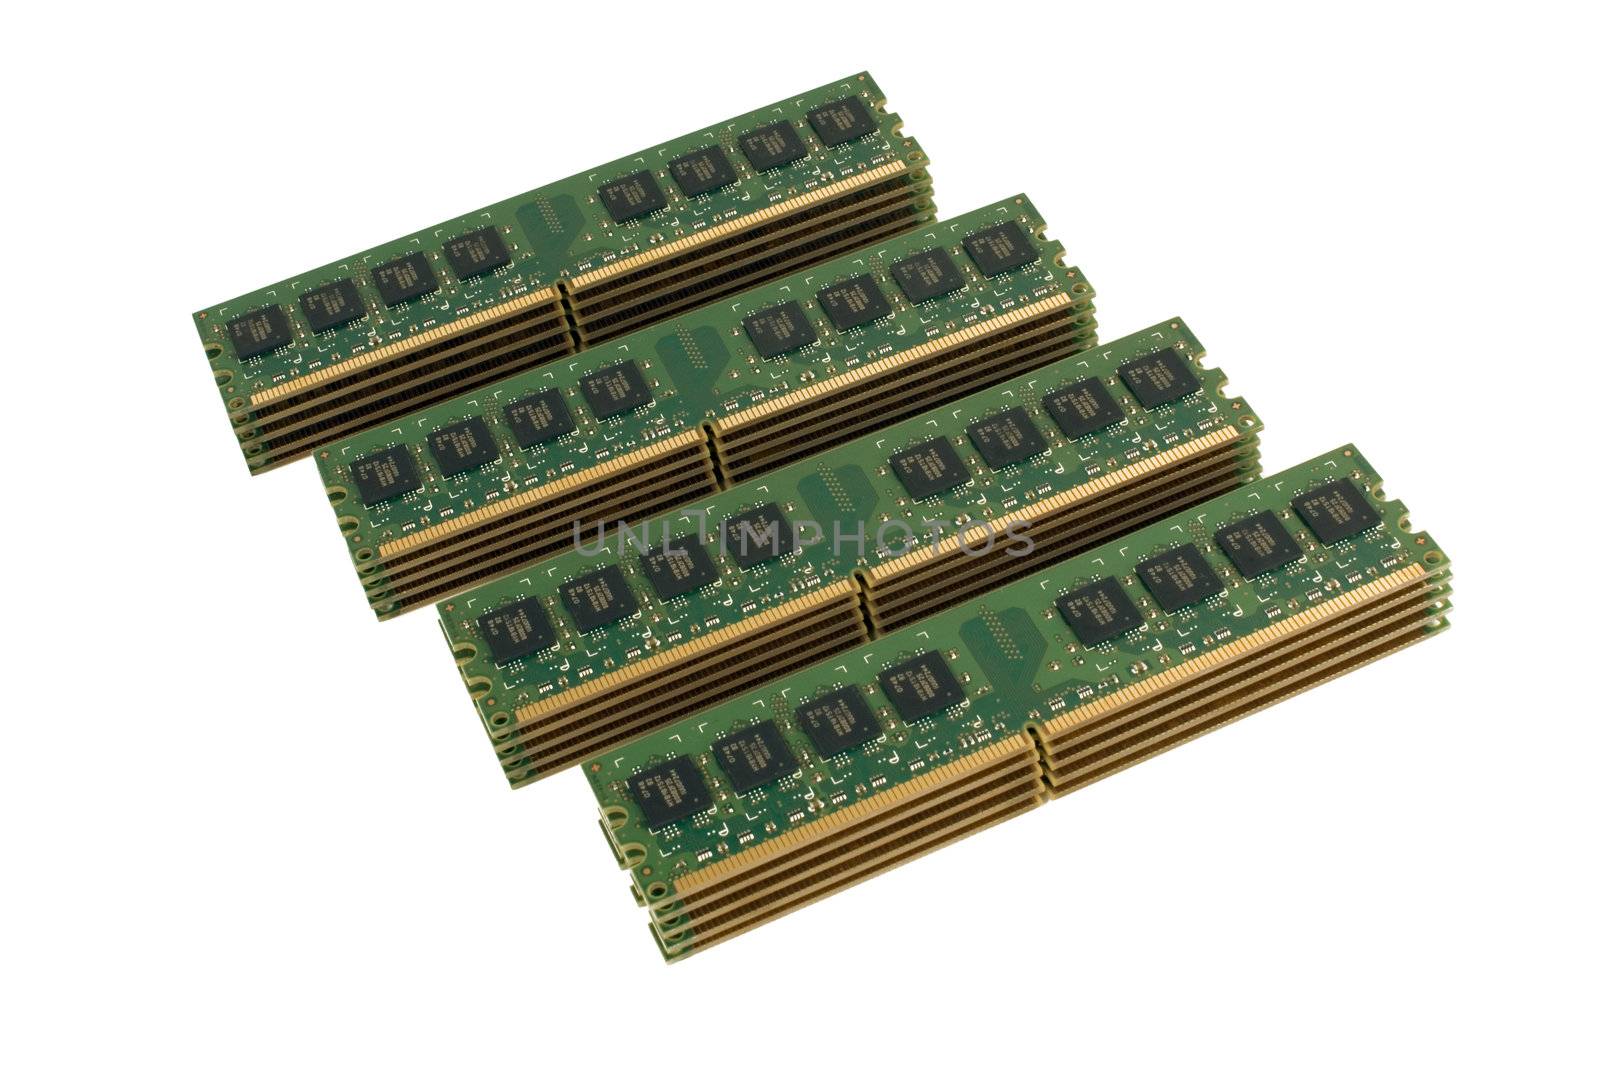 4 column of computer memory modules 2 by timbrk